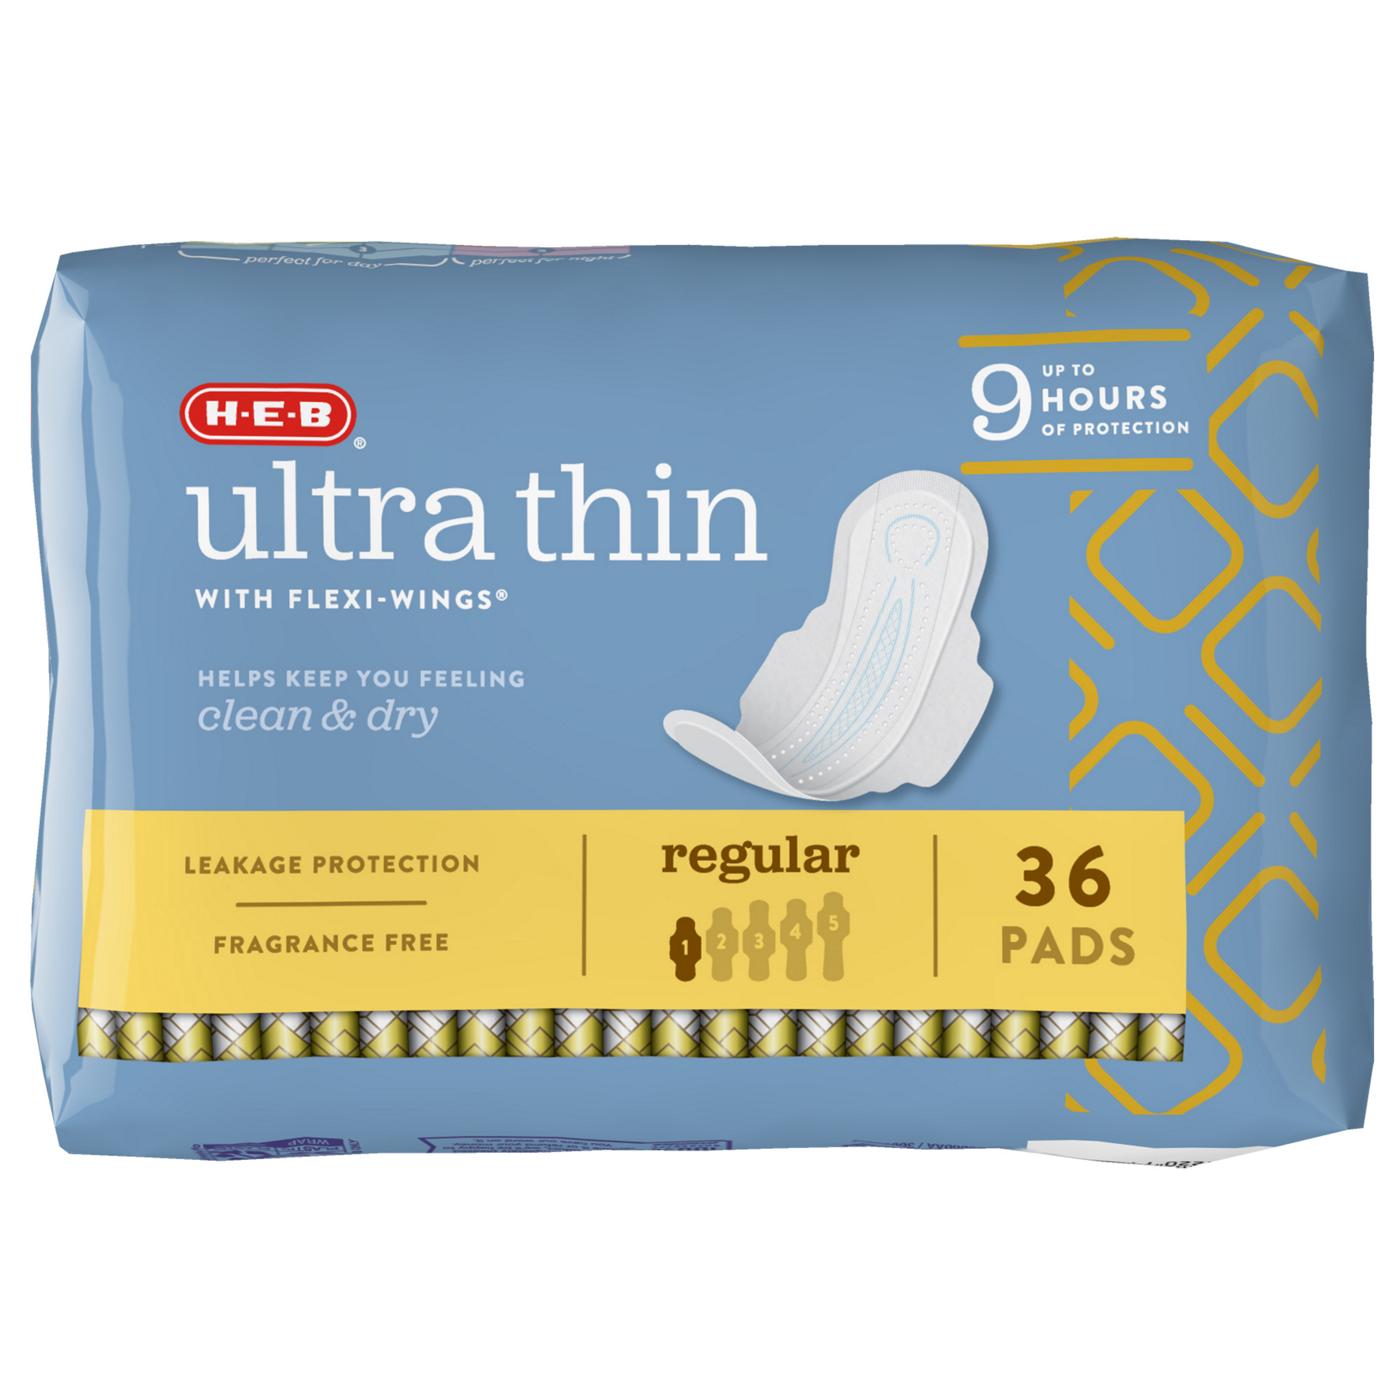 H-E-B Ultra Thin with Flexi-Wings Pads - Regular; image 6 of 7